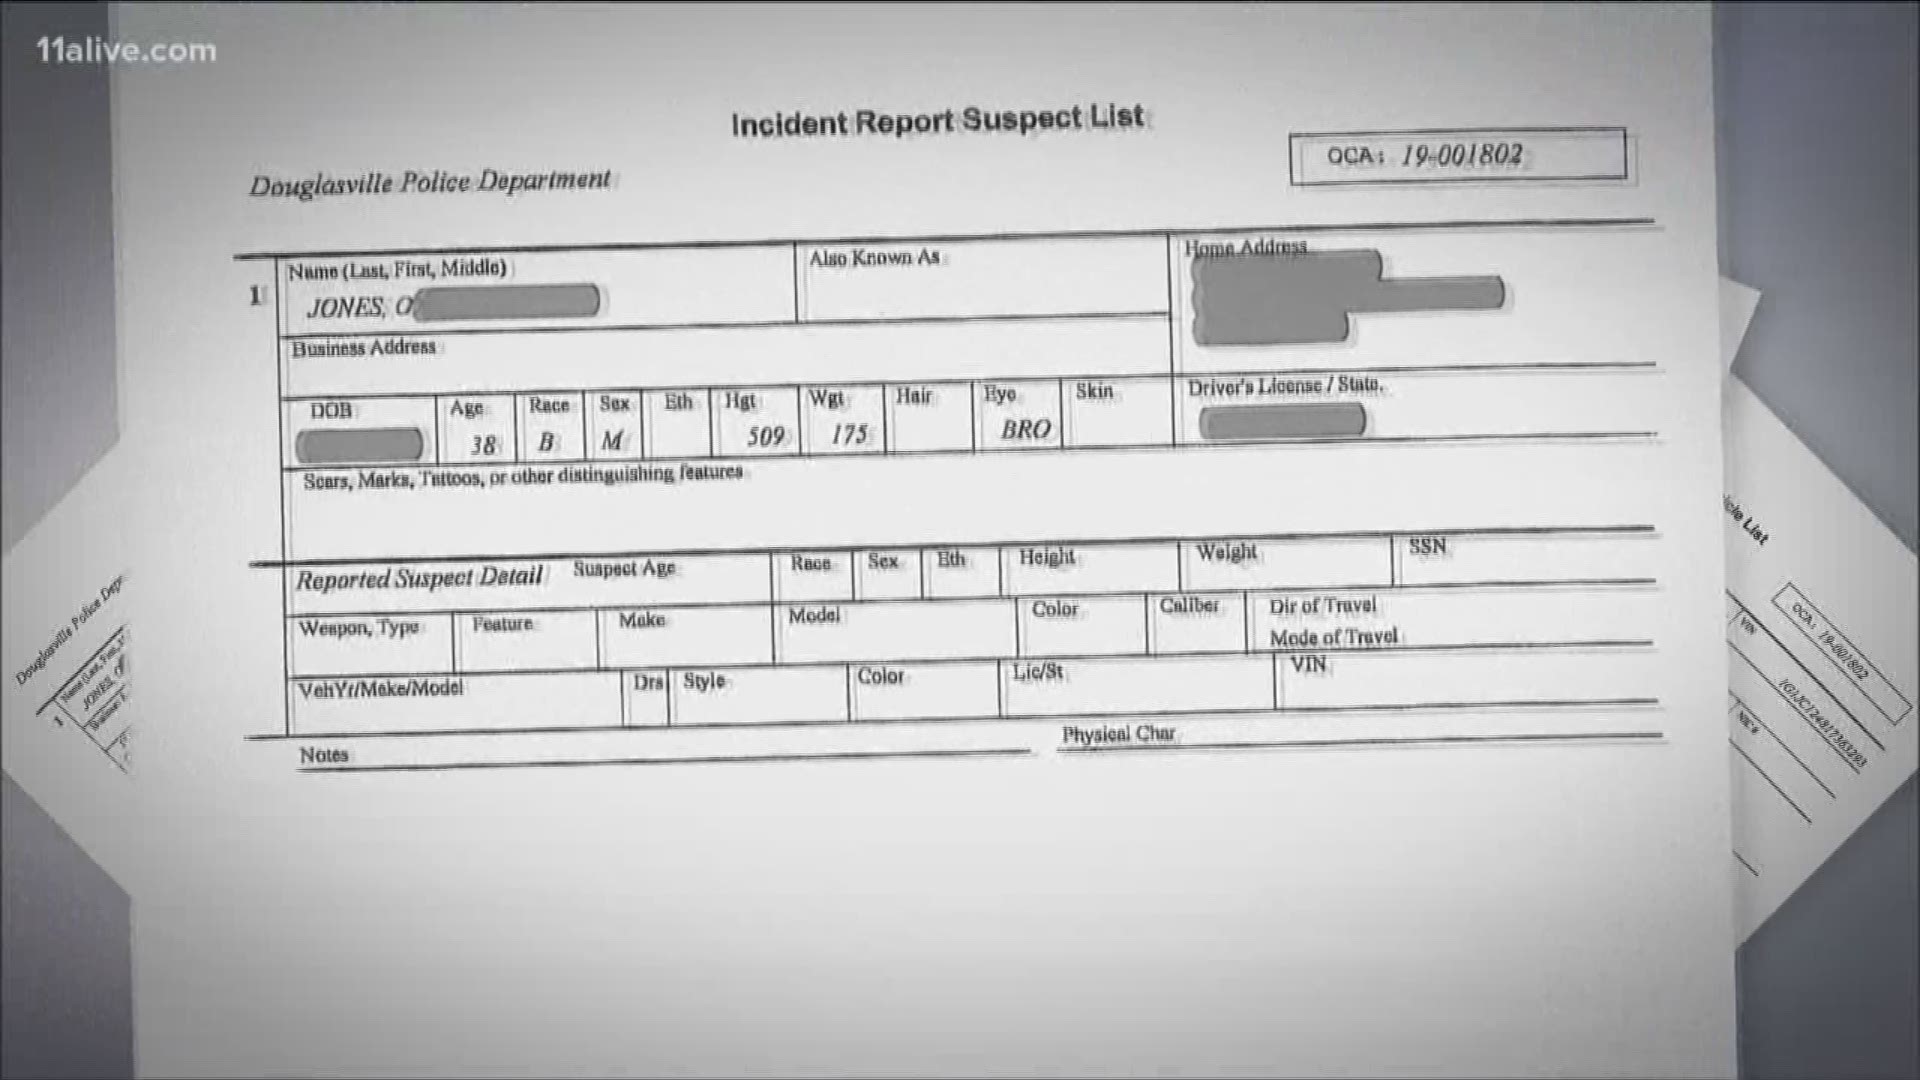 11Alive has been asking Douglasville police for the incident report hoping to get answers about what led up to the gunfire. But when they finally sent it Tuesday afternoon, it was heavily redacted.